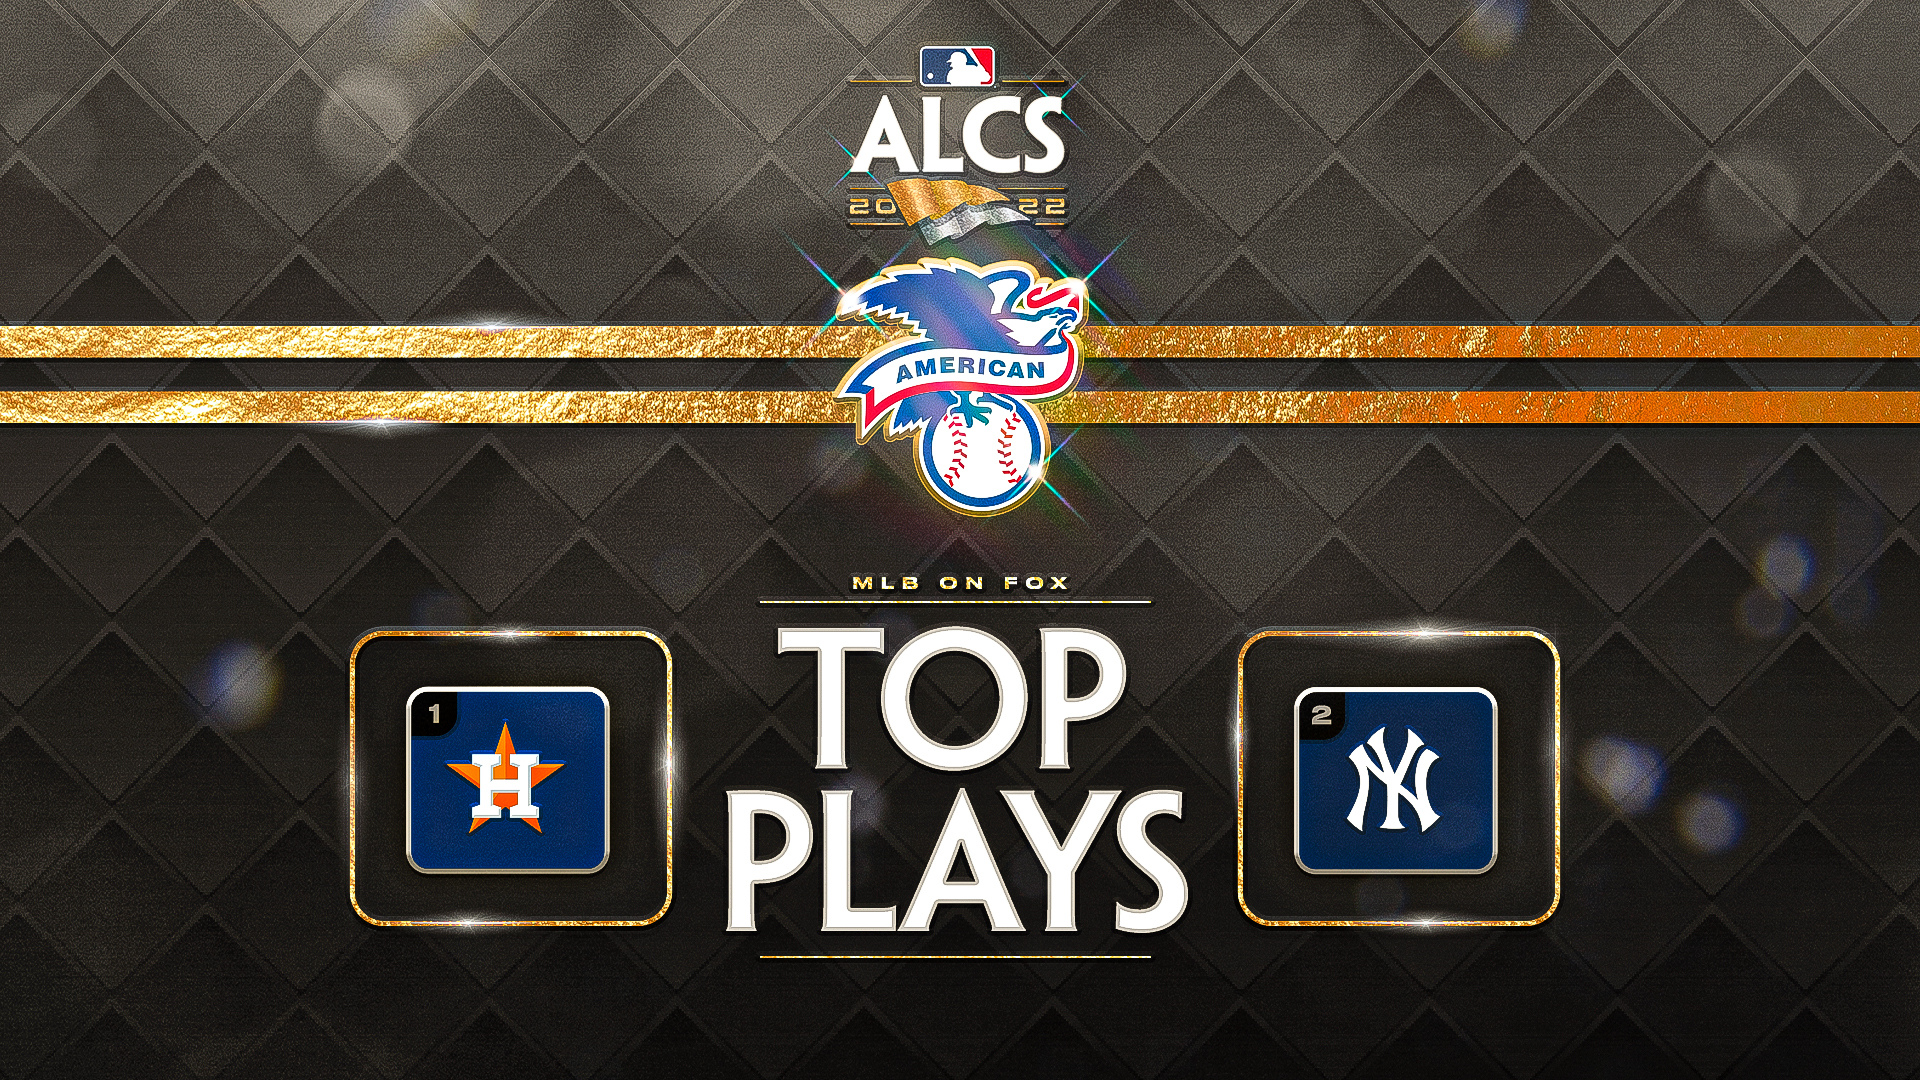 2022 MLB playoffs: Yankees vs. Astros odds, line, ALCS Game 2 picks,  predictions from proven computer model 